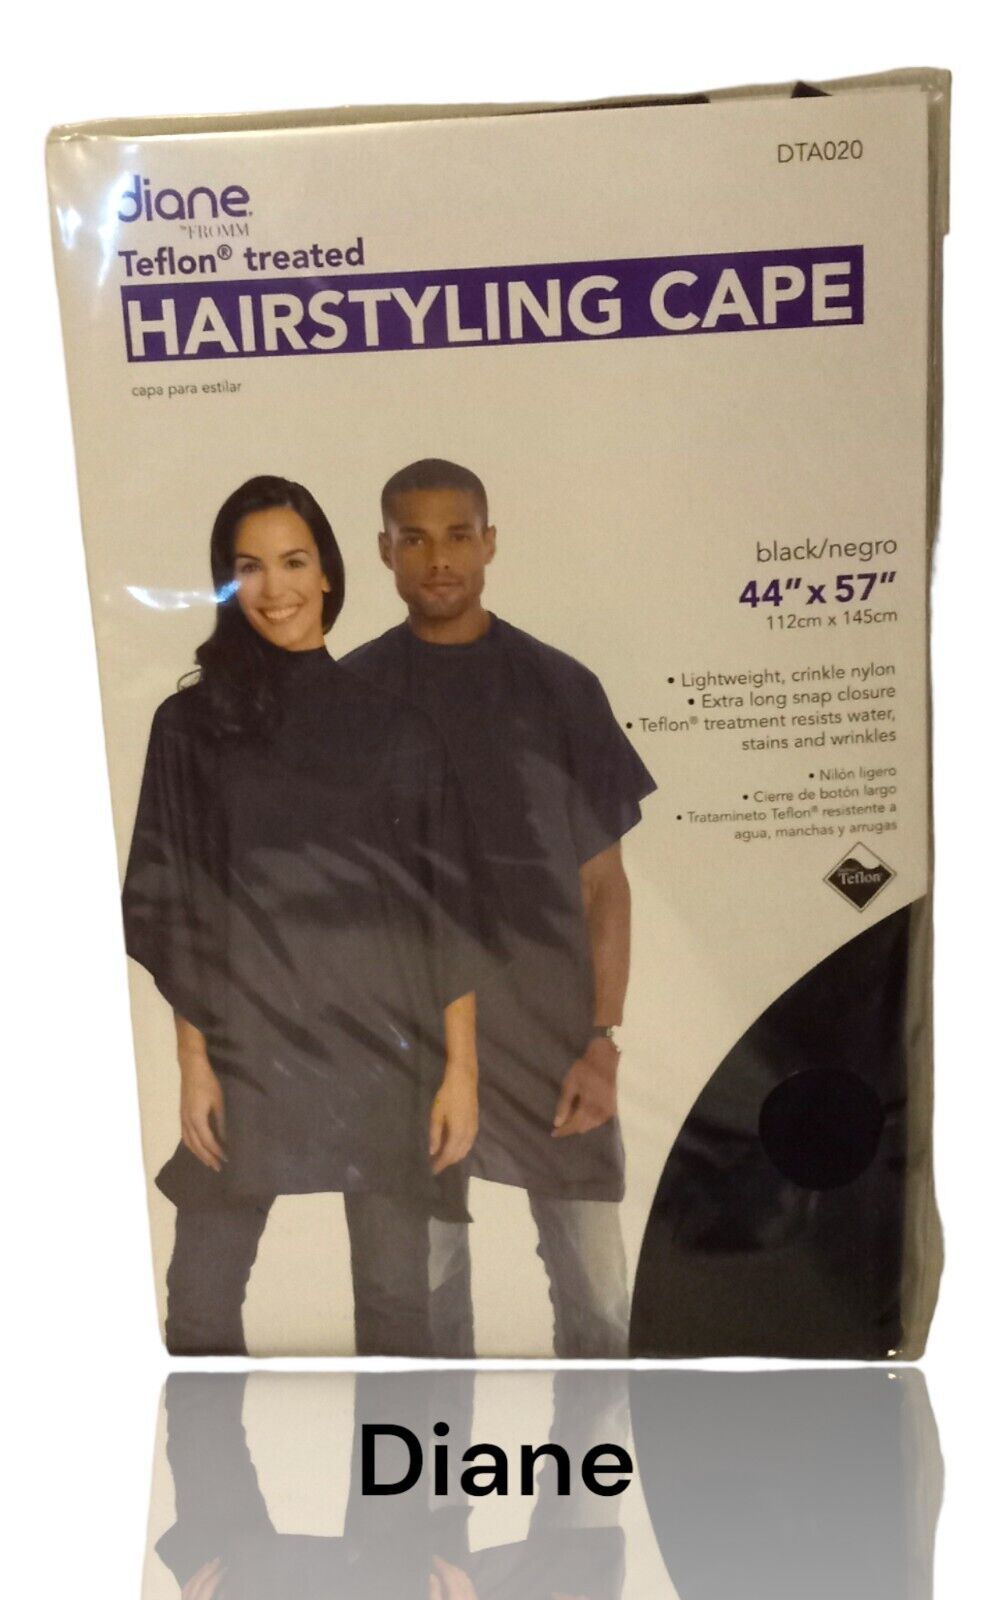 Diane Hairstyling Cape 44"x57"